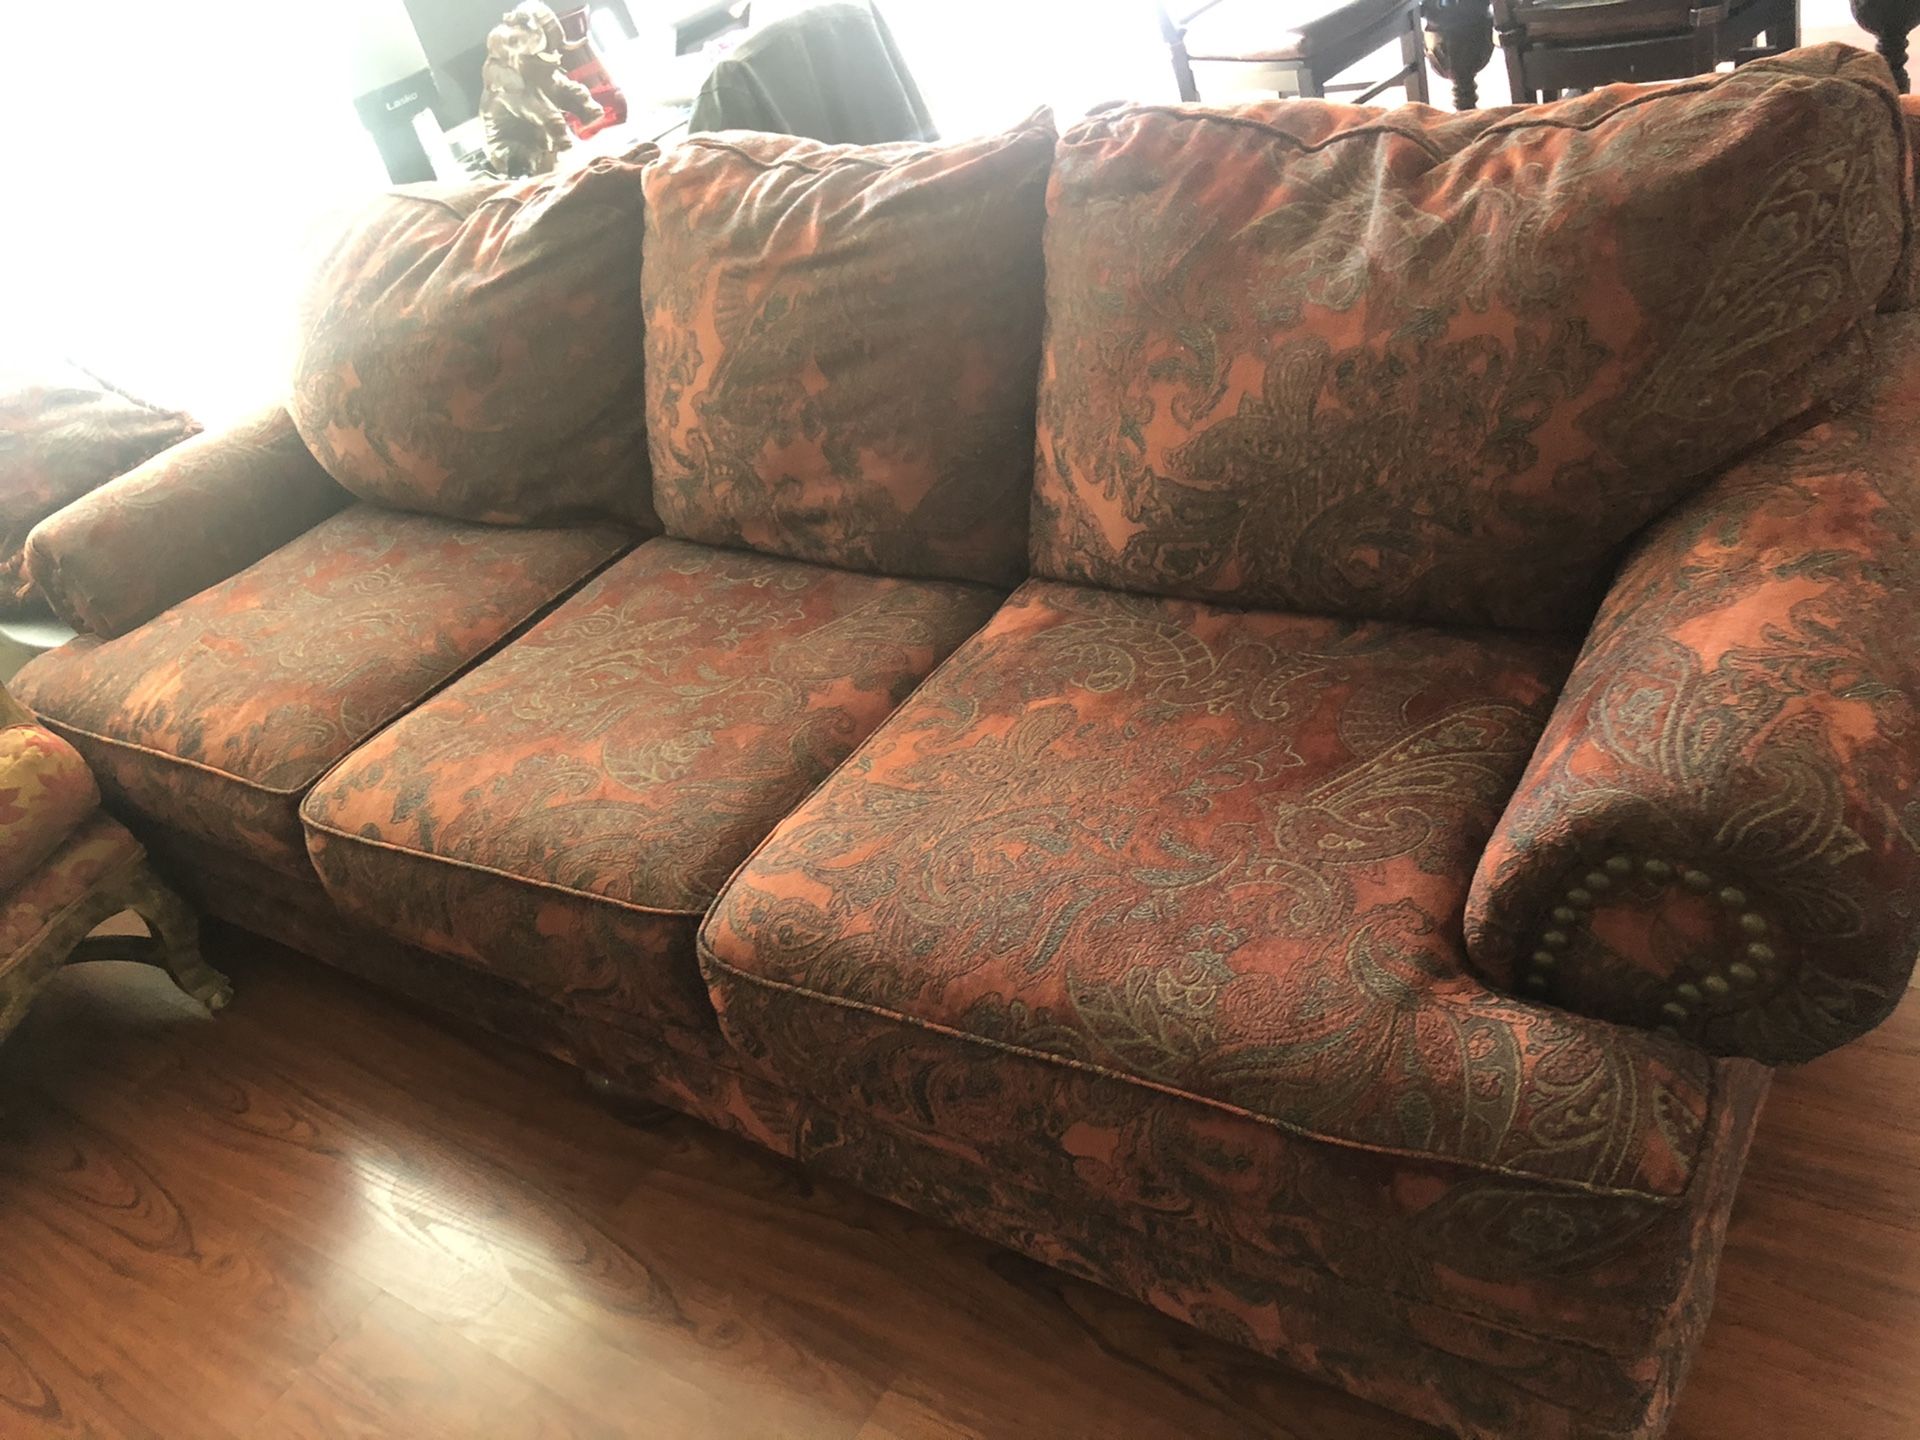 FREE COUCH AND CHAIR